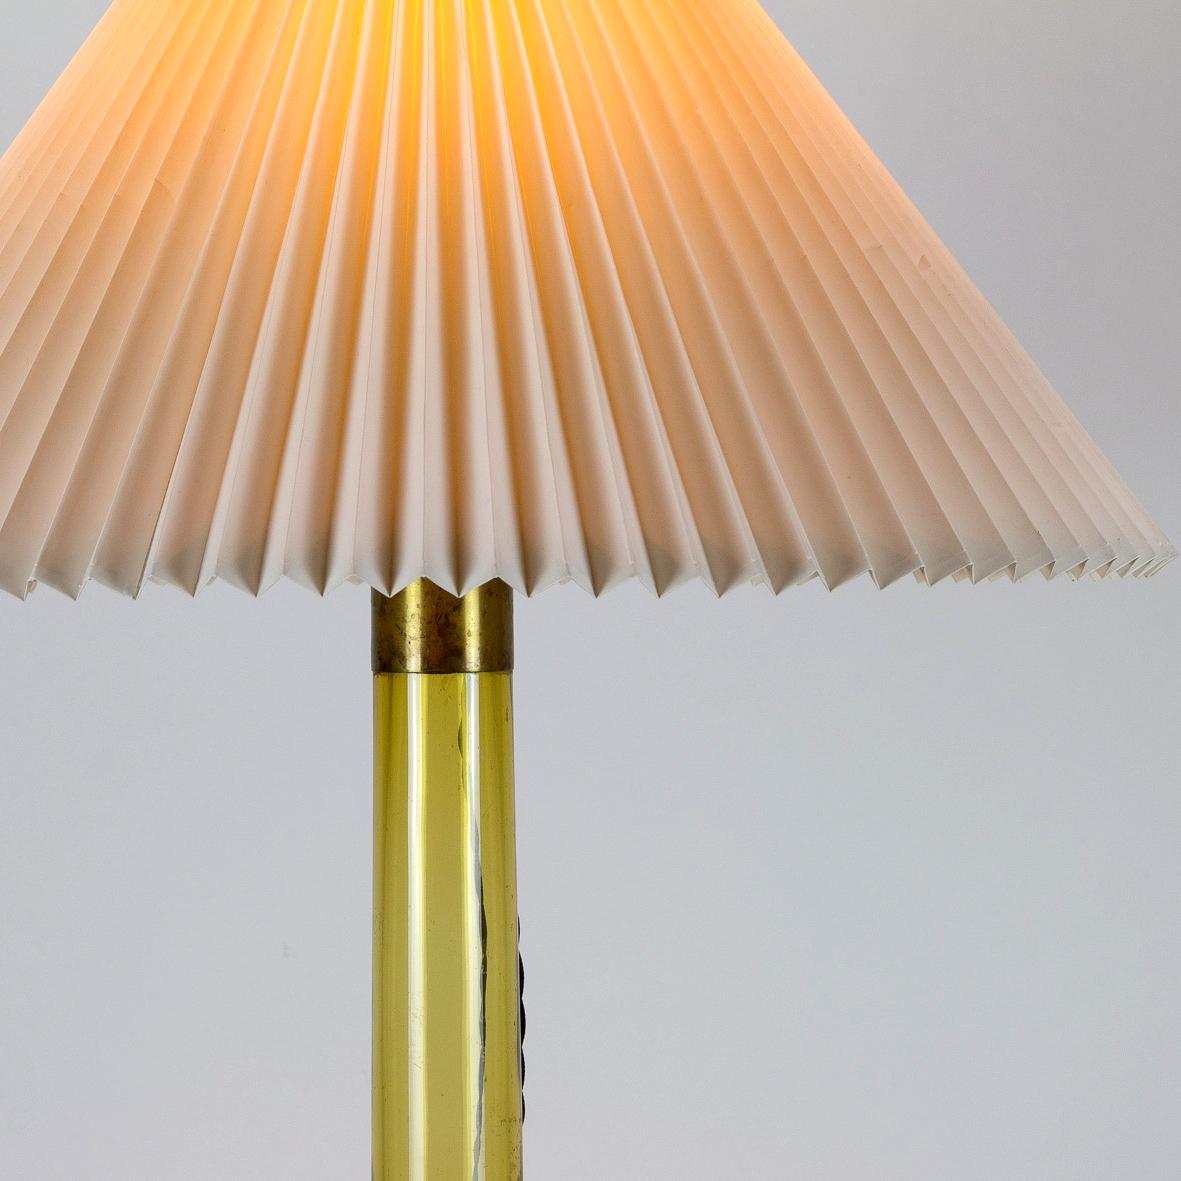 Hand-Crafted A Near Pair of Midcentury Holmegaard Glass Table Lamps, Le Klint, Denmark, 1960s